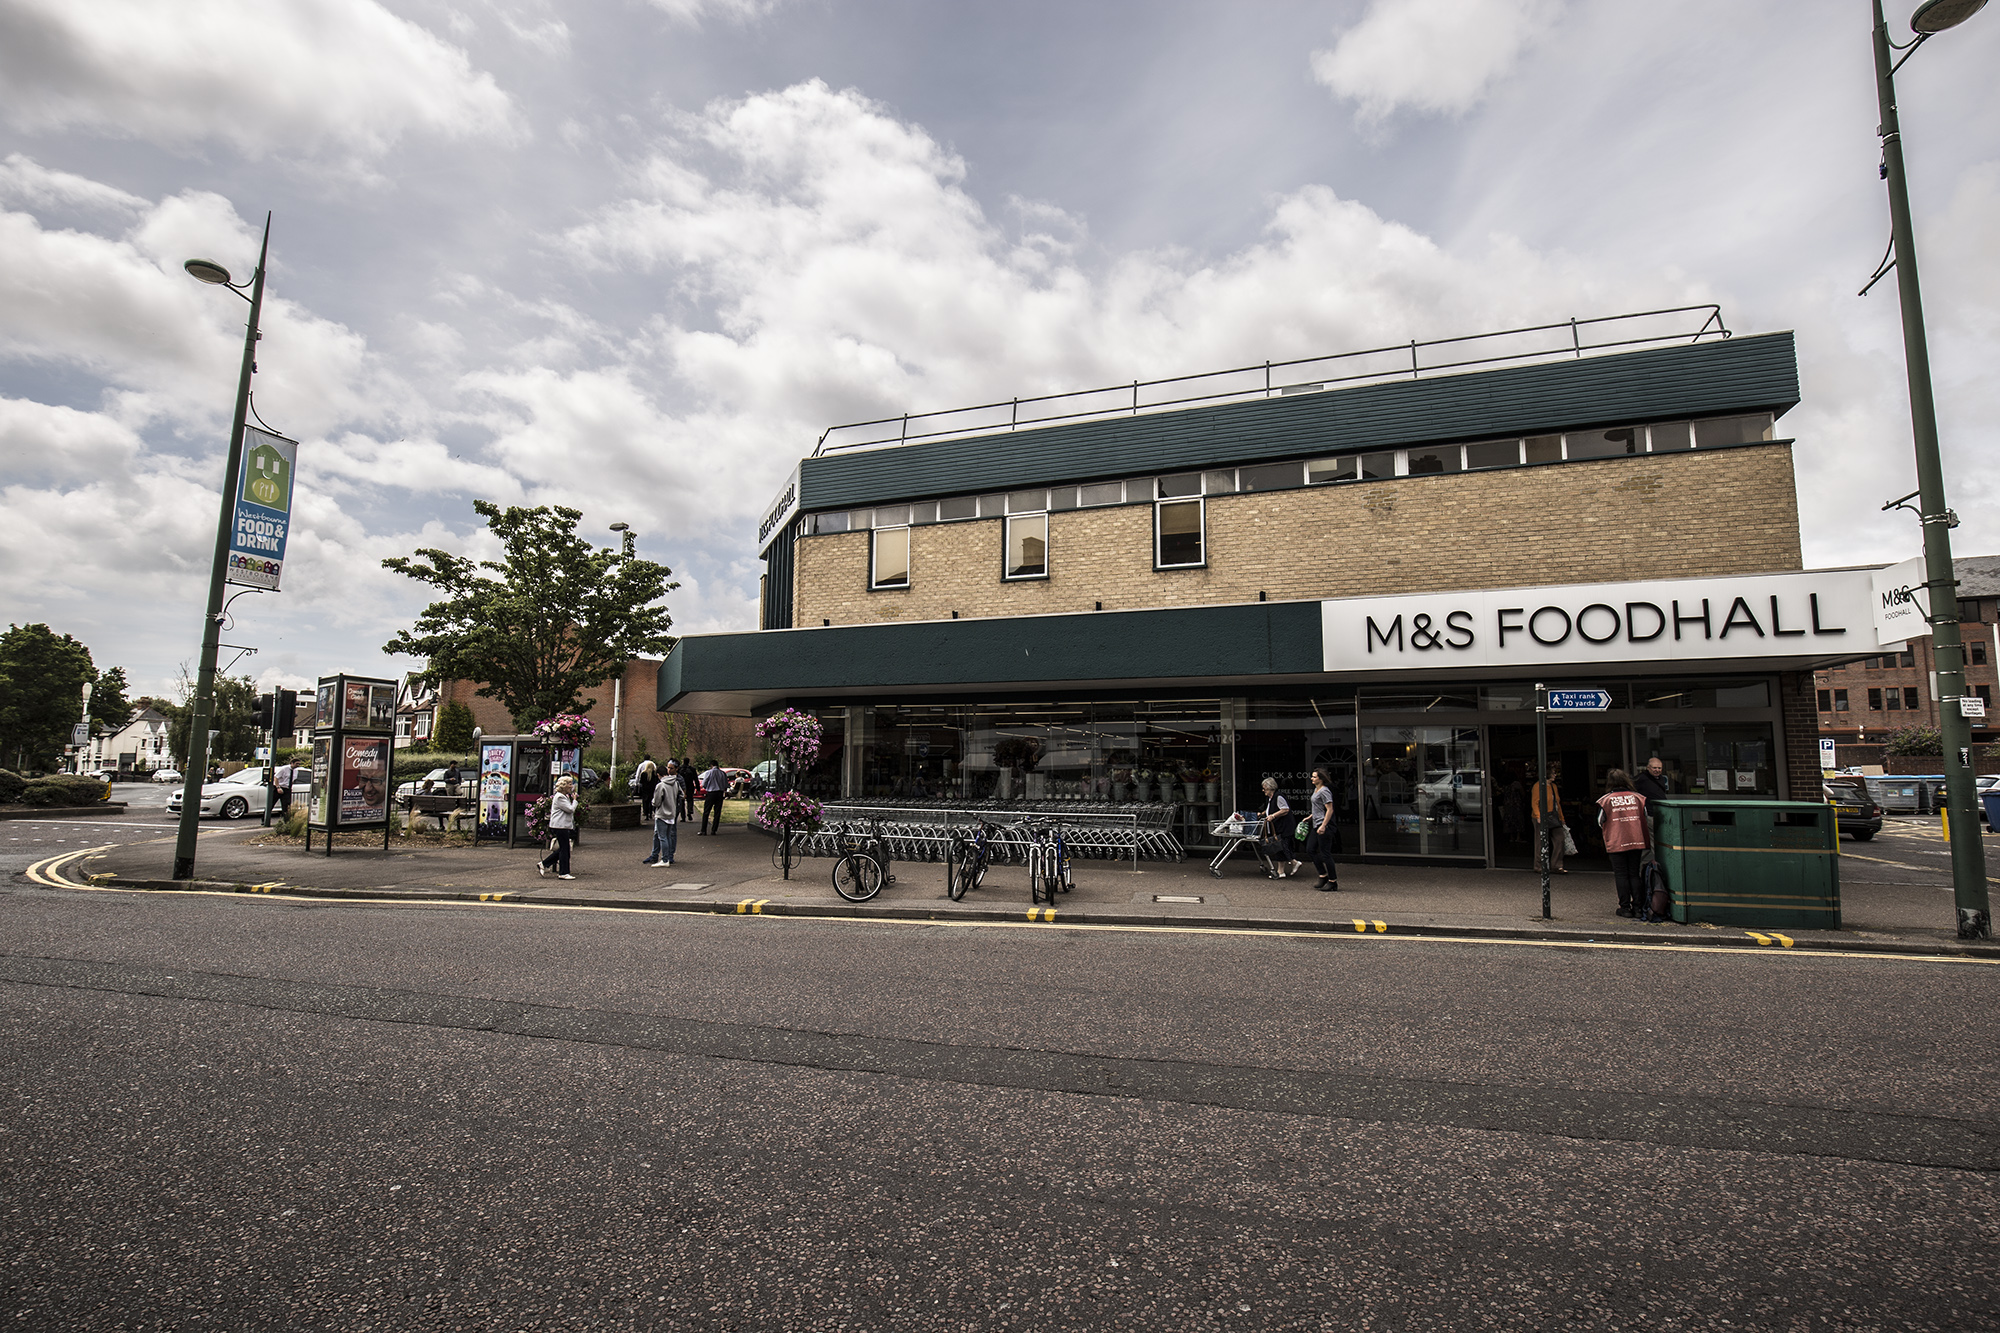 Westbourne Supermarkets - M&S Foodhall